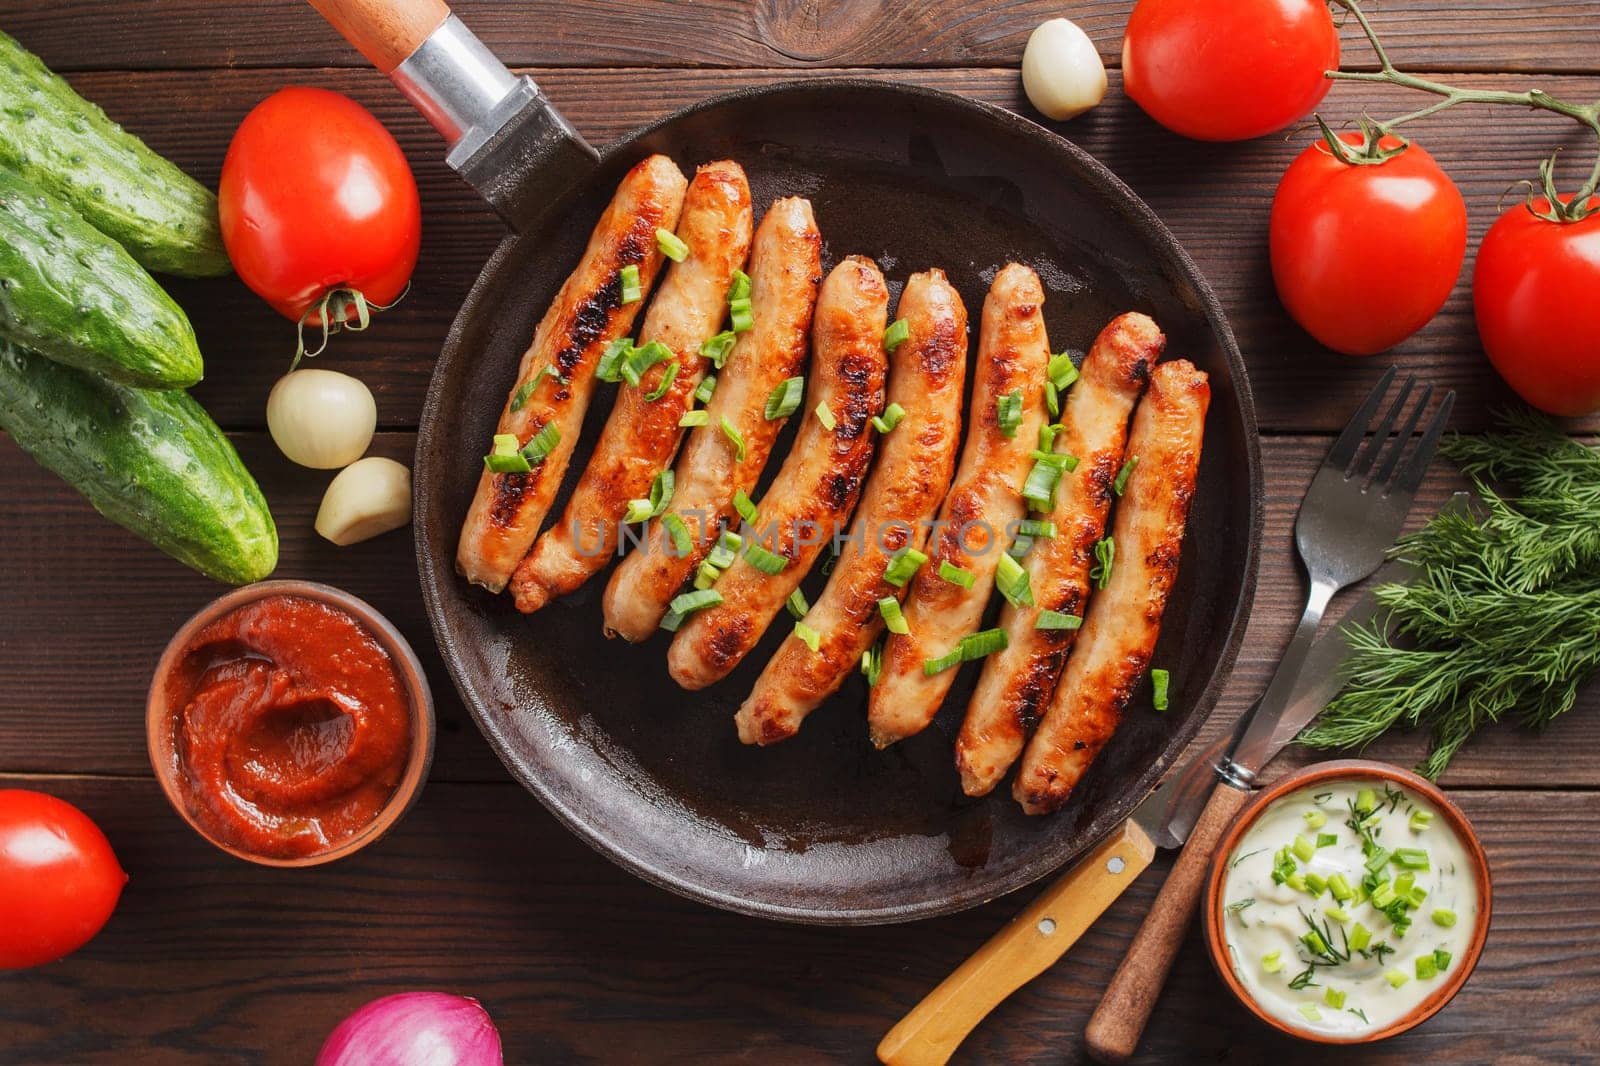 Delicious sausages cooked in a pan with vegetables and various sauces on a wooden table.